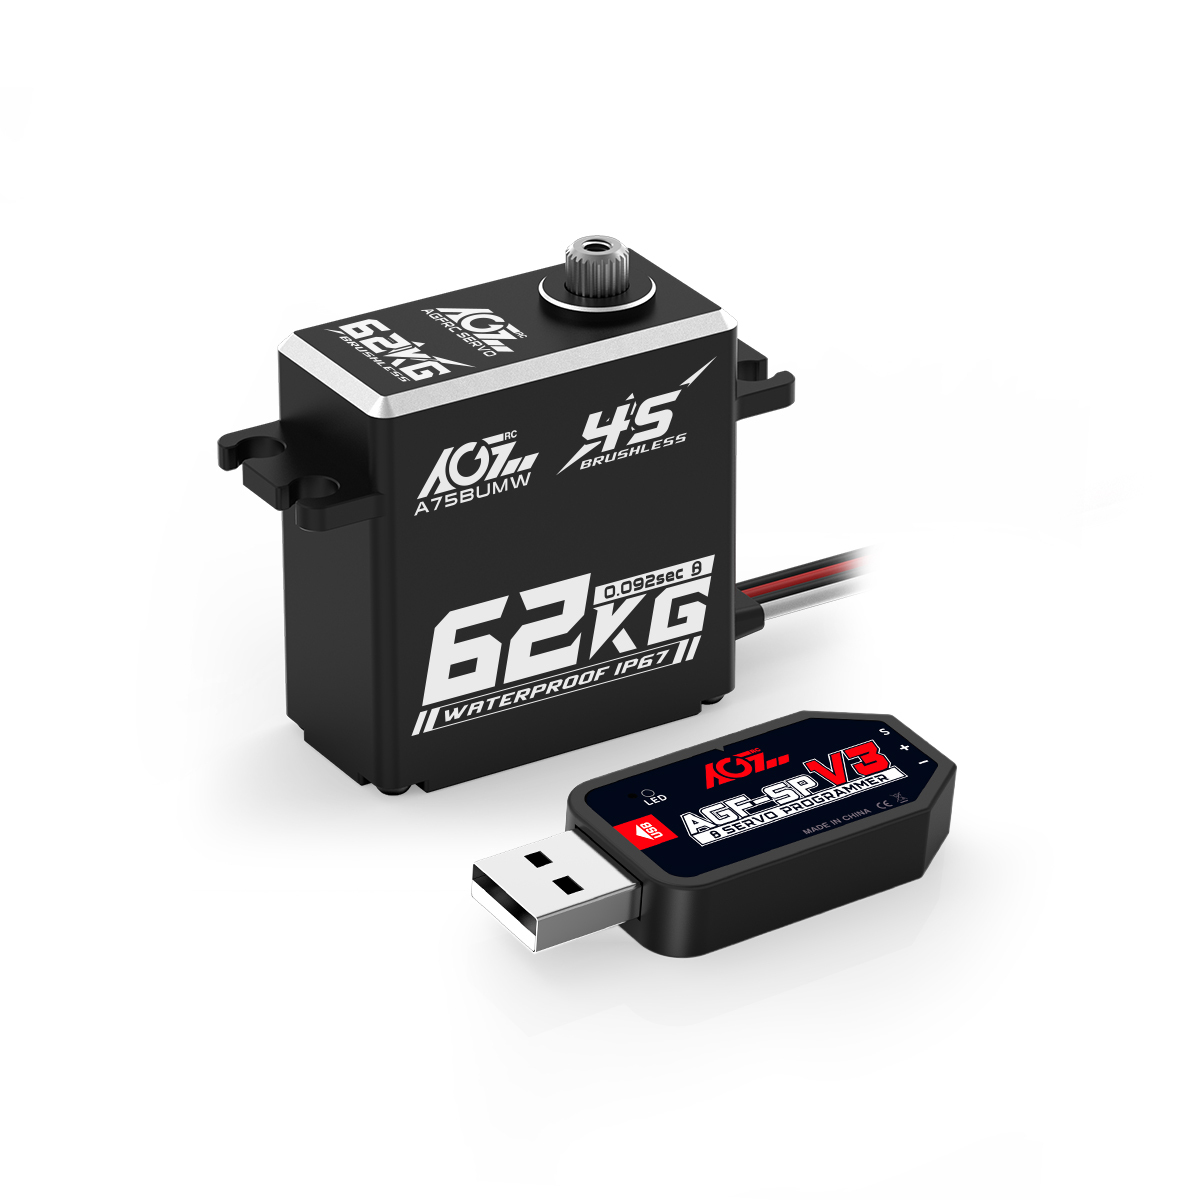 Combo Set -Direct Power 62KG 0.092Sec 1/8 Scale WP Brushless 4S RC Servo  with USB Programmer (A75BUMW +AGF-SPV3)